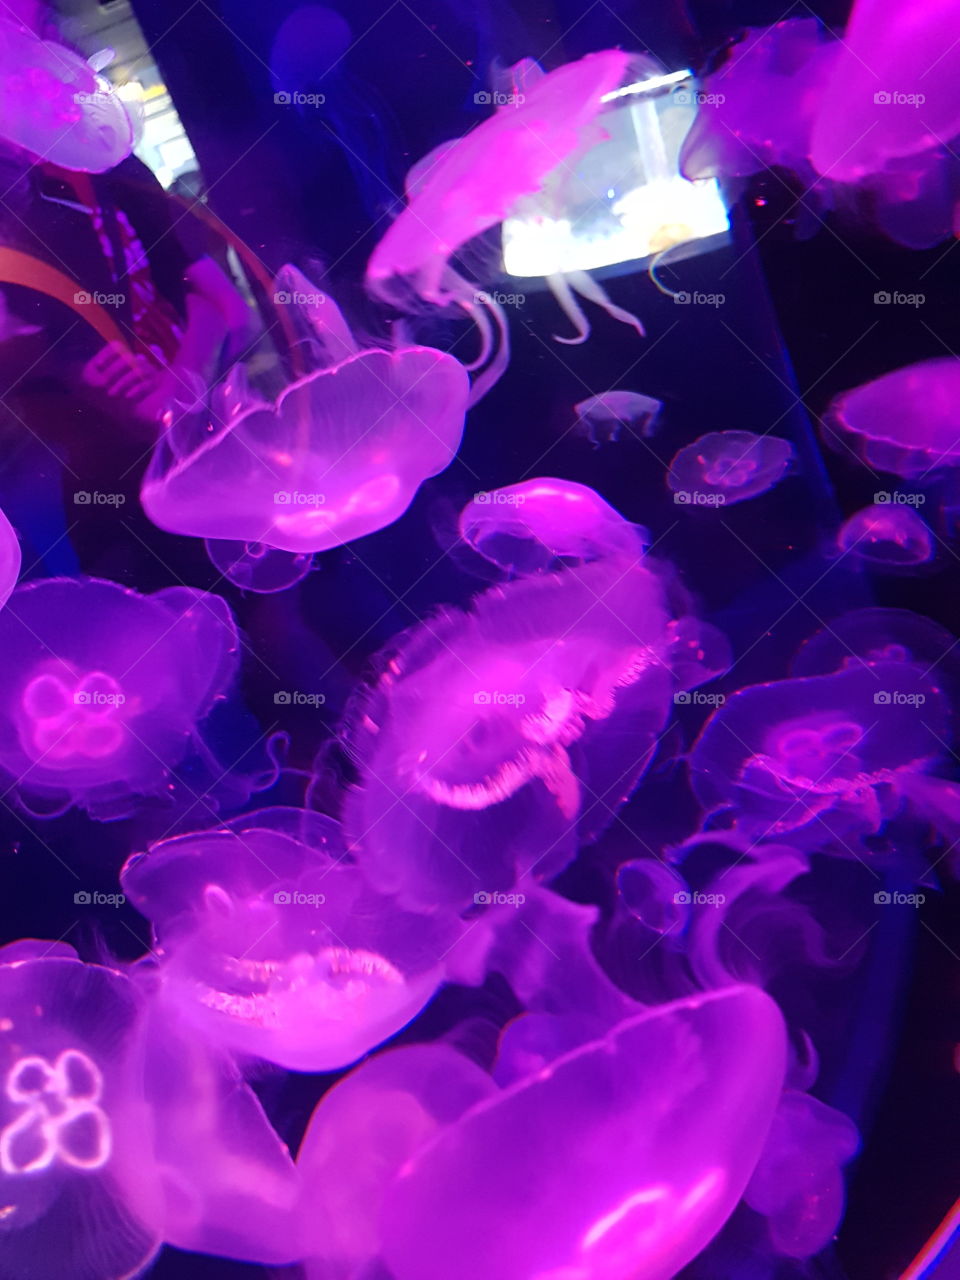 vibrance of the jellyfish